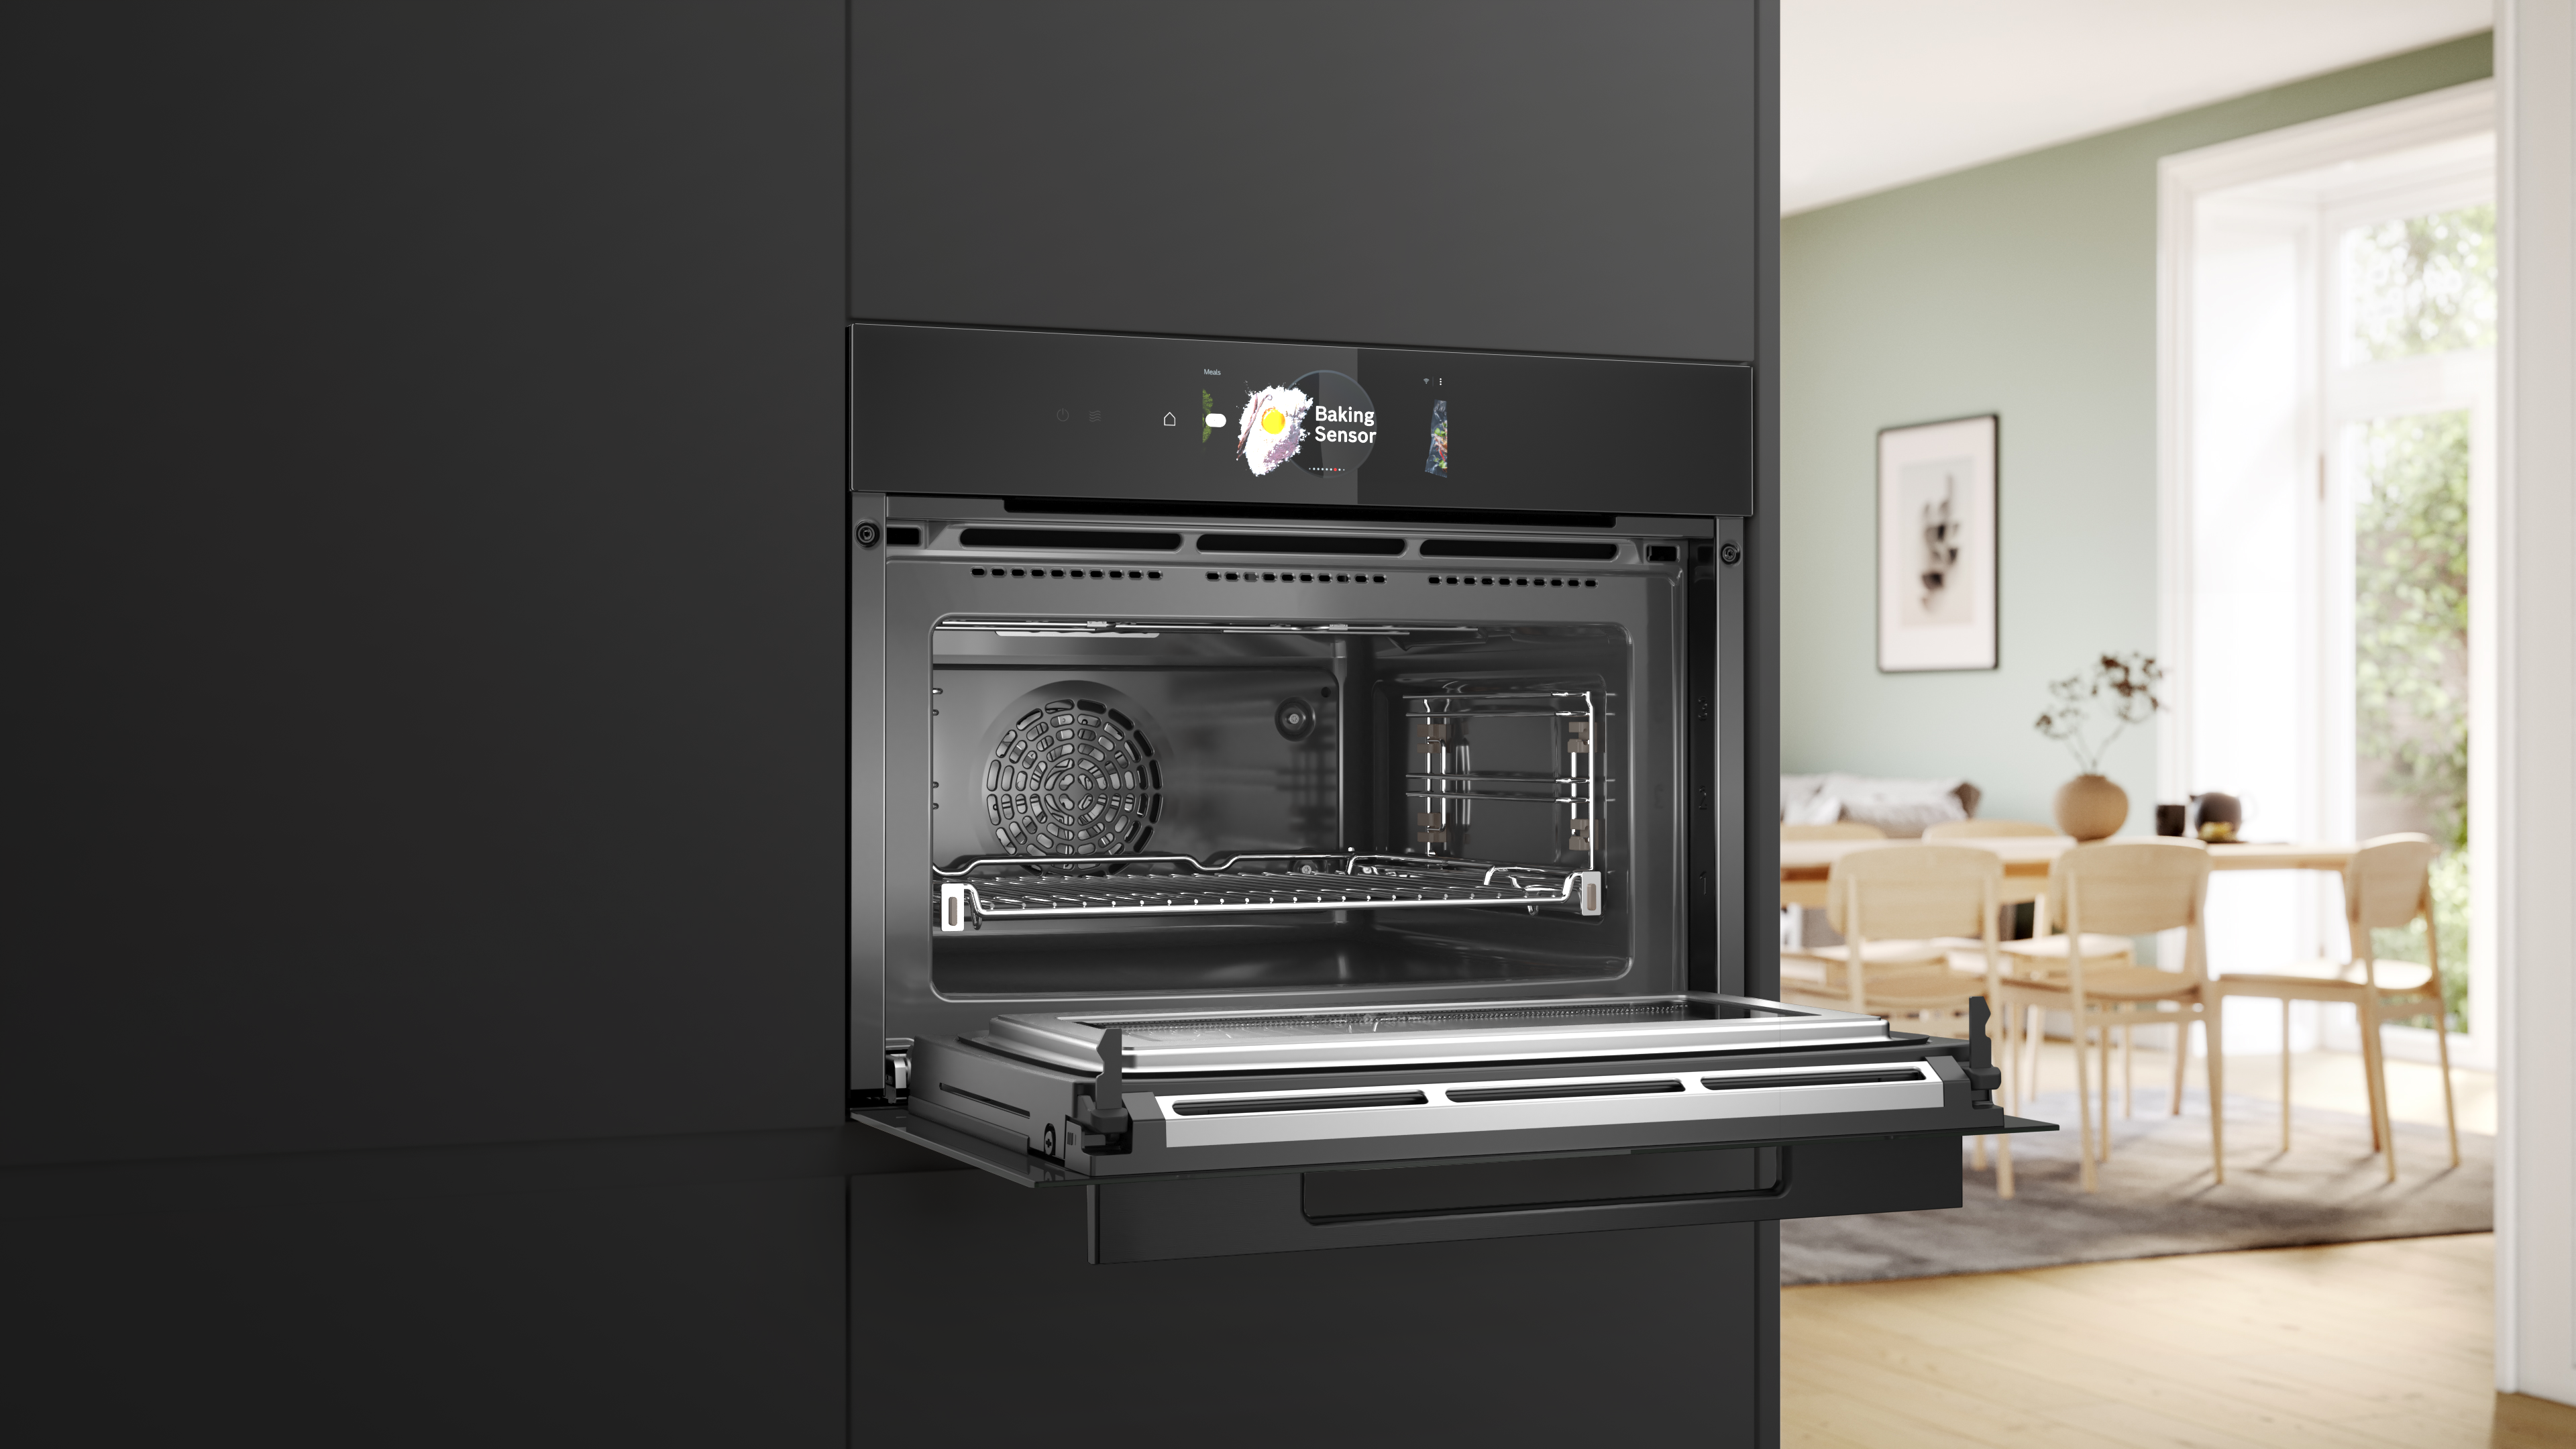 iF Design - Bosch Serie 8 Accentline Built In Compact Oven MW